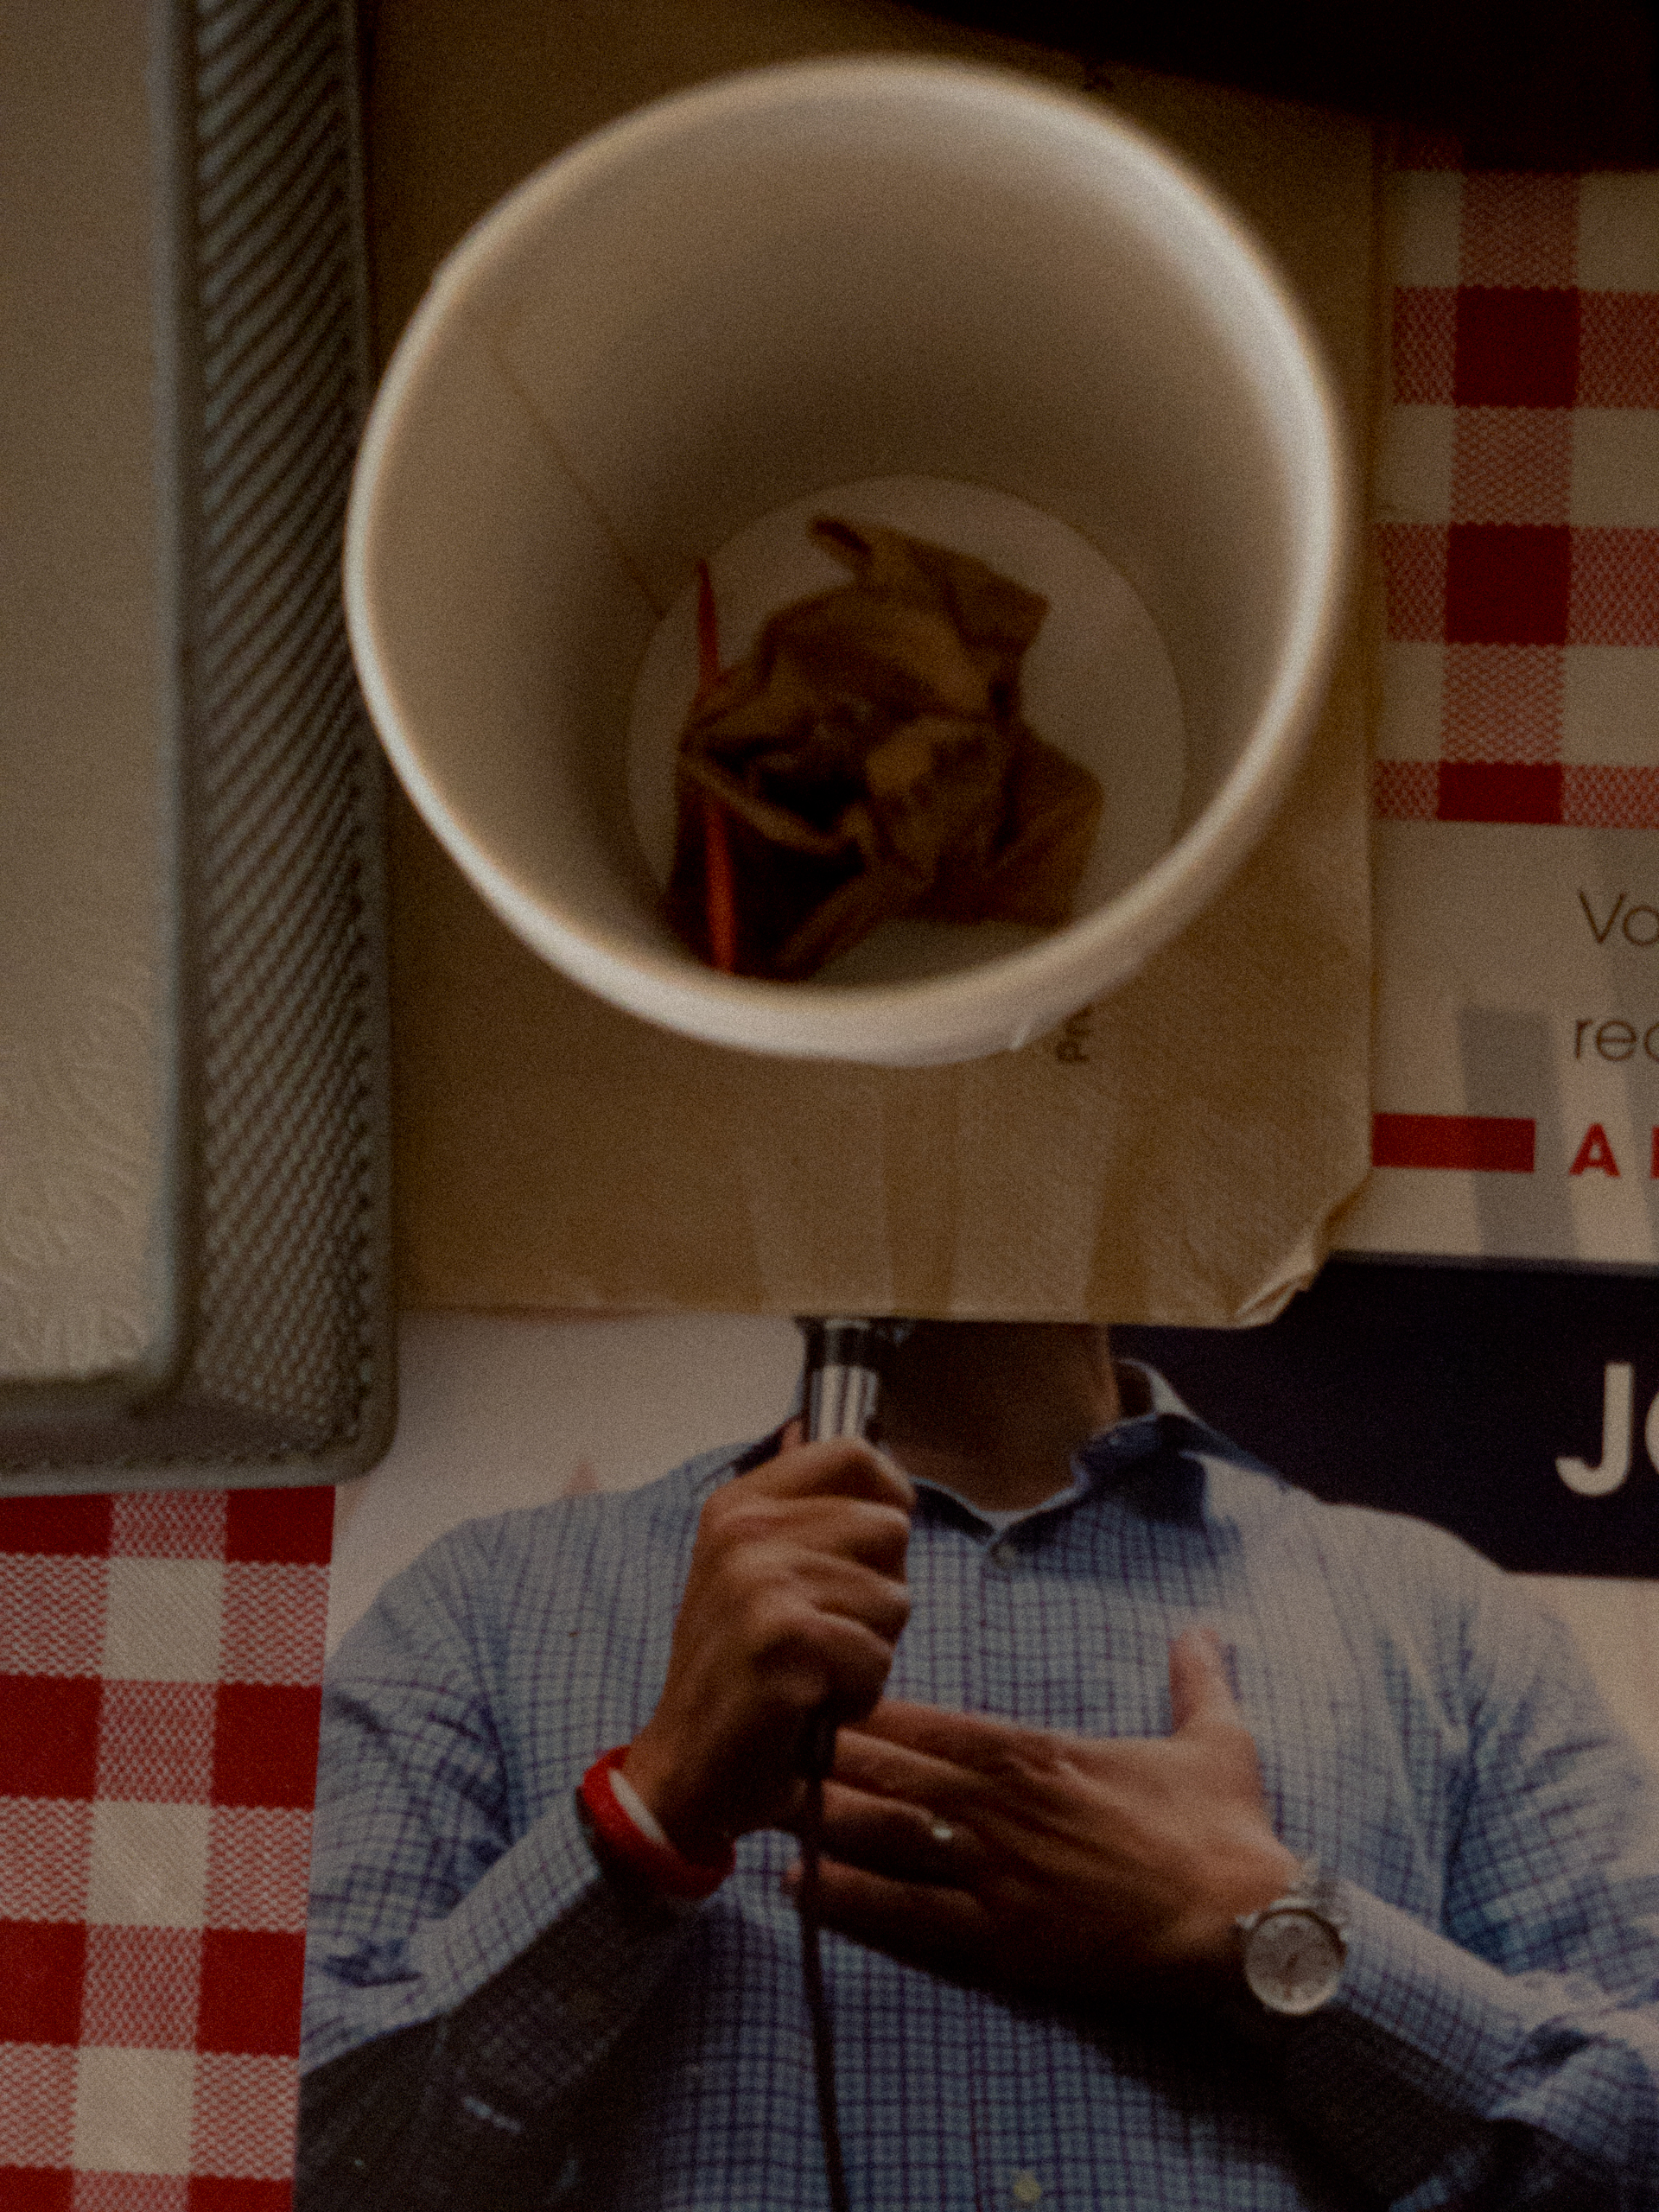 Cup with tea bag sitting on campaign literature at rally for Marco Rubio, Hooksett, NH 2015.